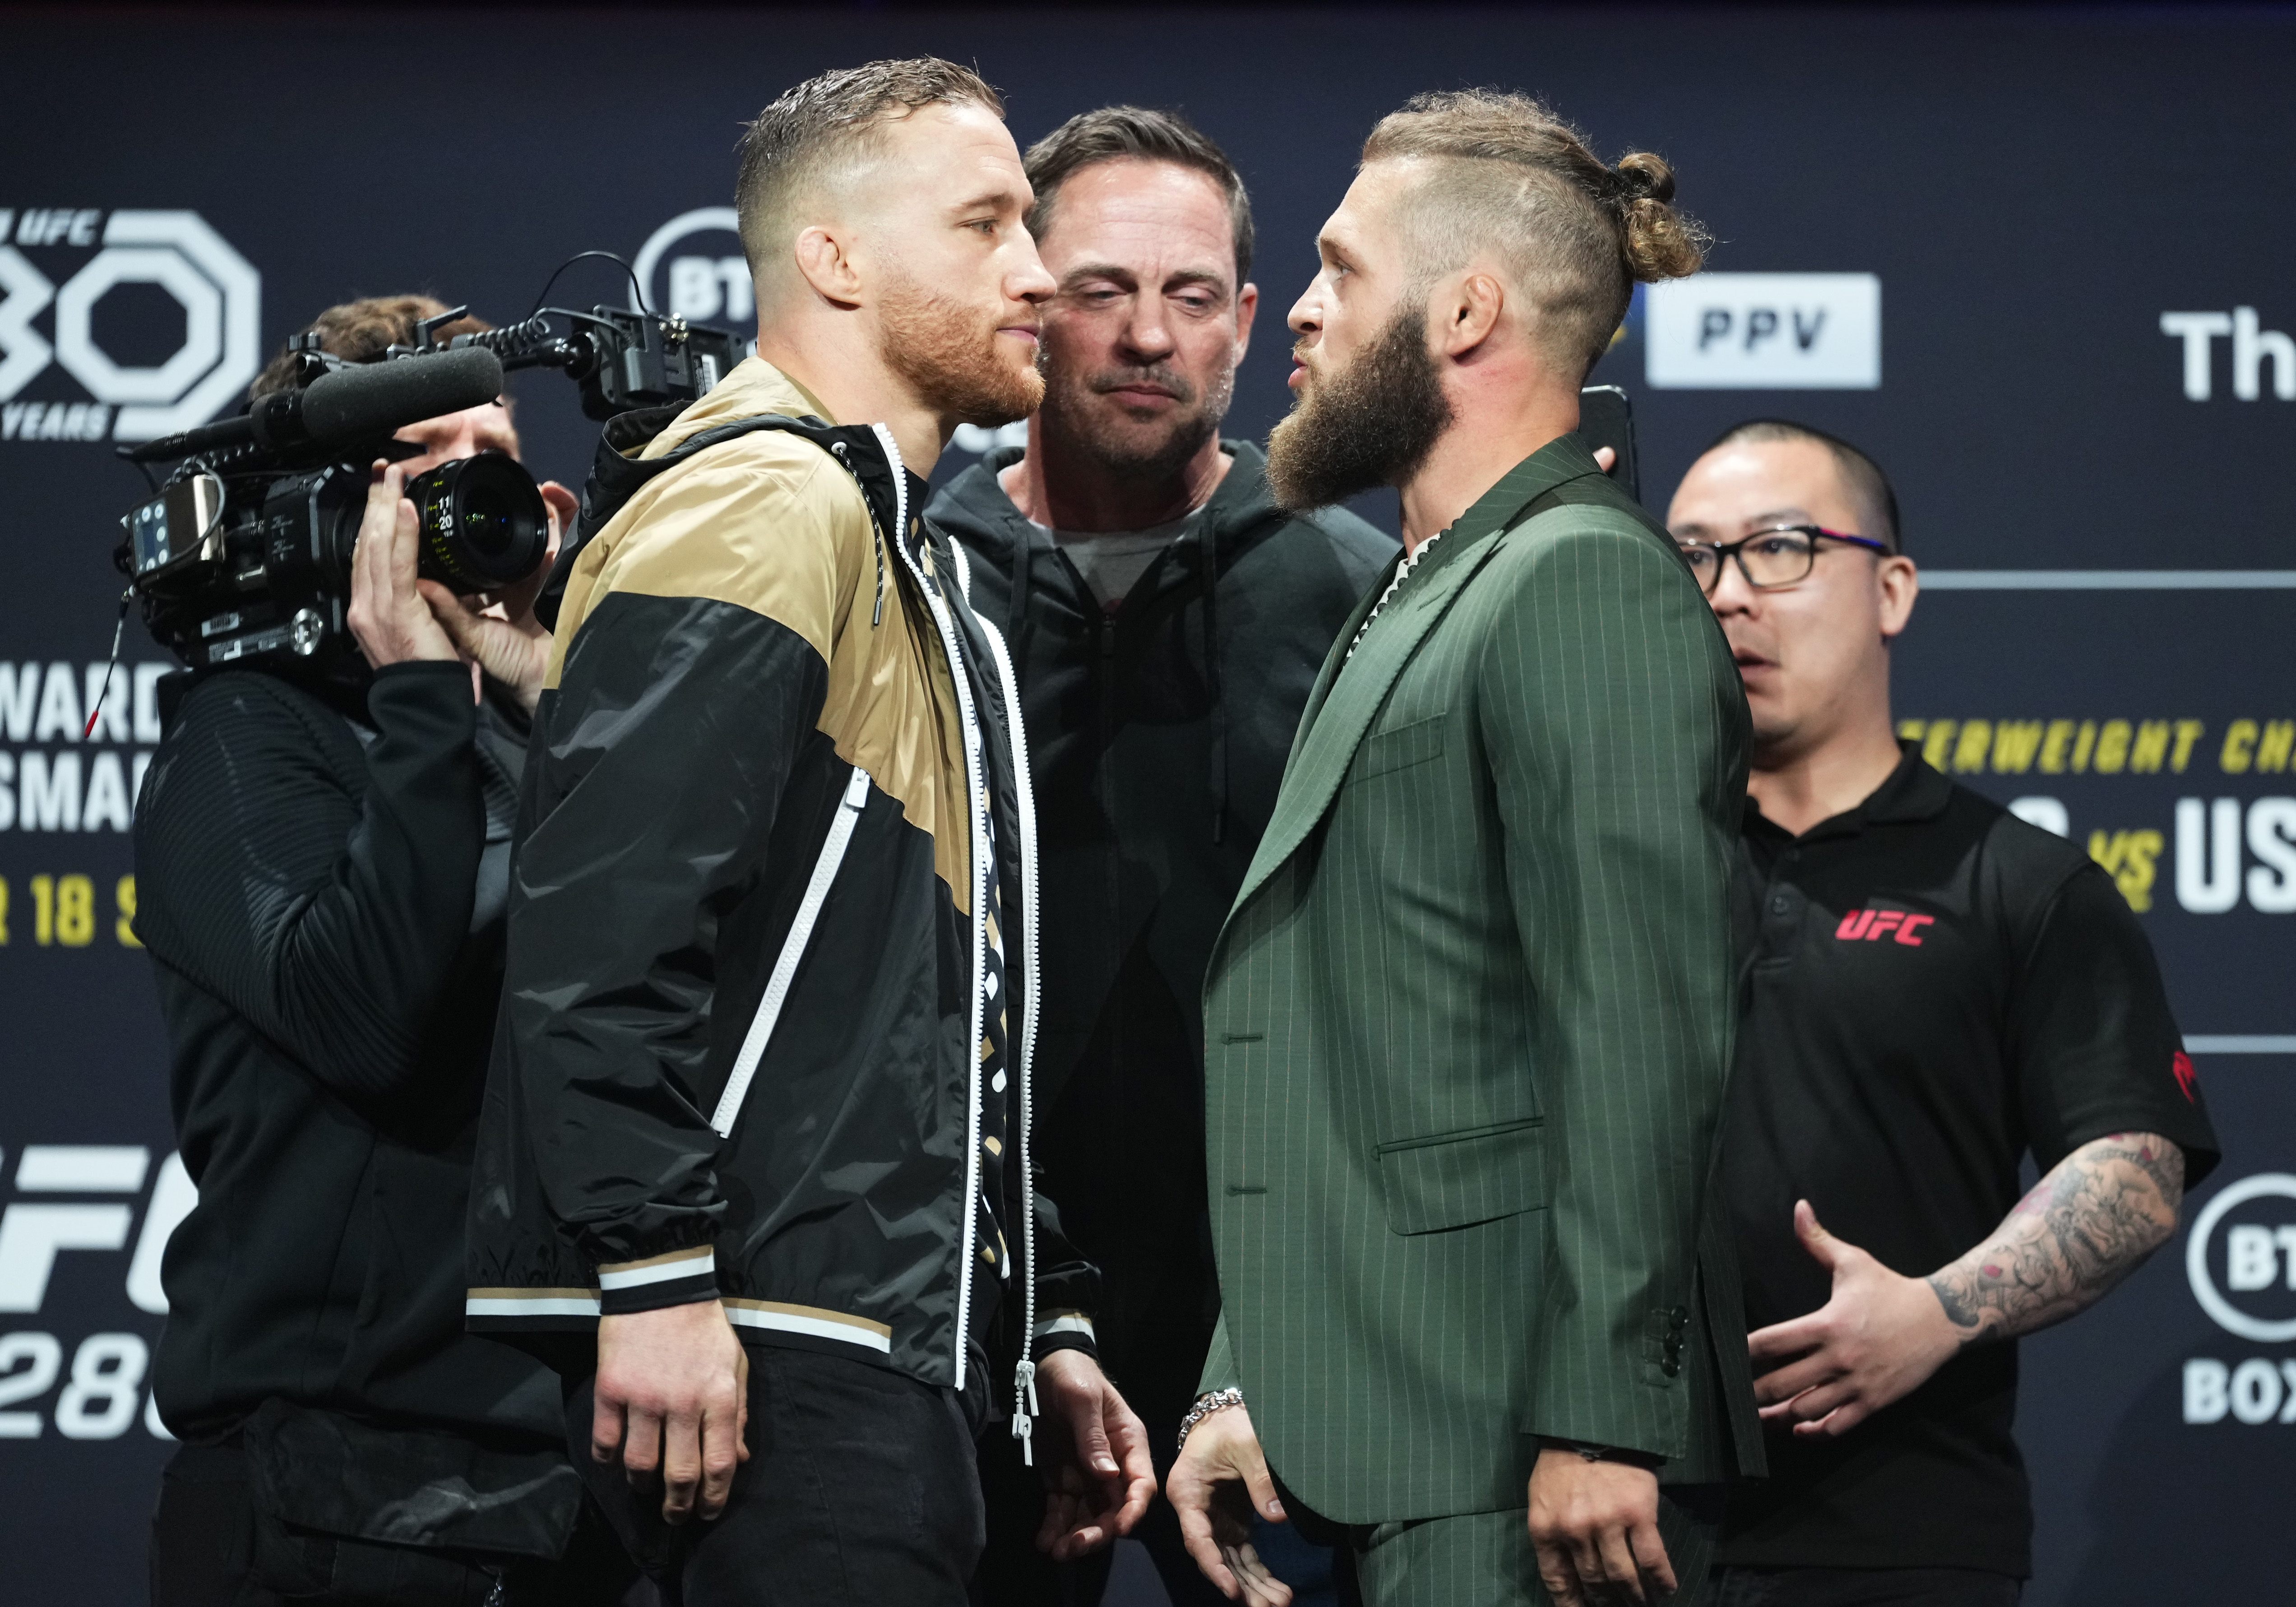 Opponents Justin Gaethje and Rafael Fiziev of Kazakstan face off during the UFC 286 press conference at Magazine London on March 16, 2023 in London, England.